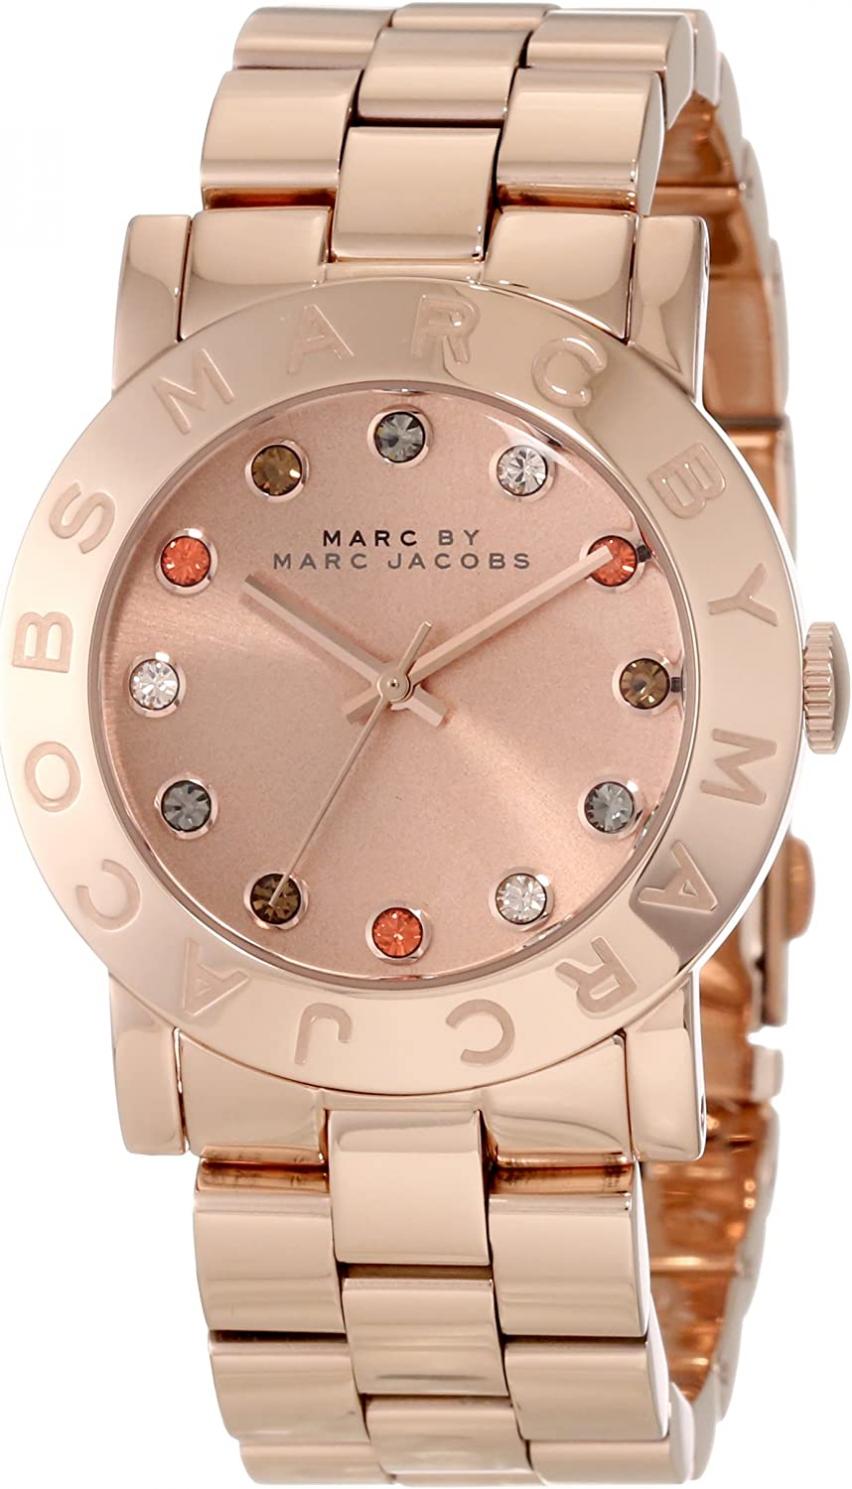 Marc by Marc Jacobs Women's MBM3142 Amy Rose Gold Watch